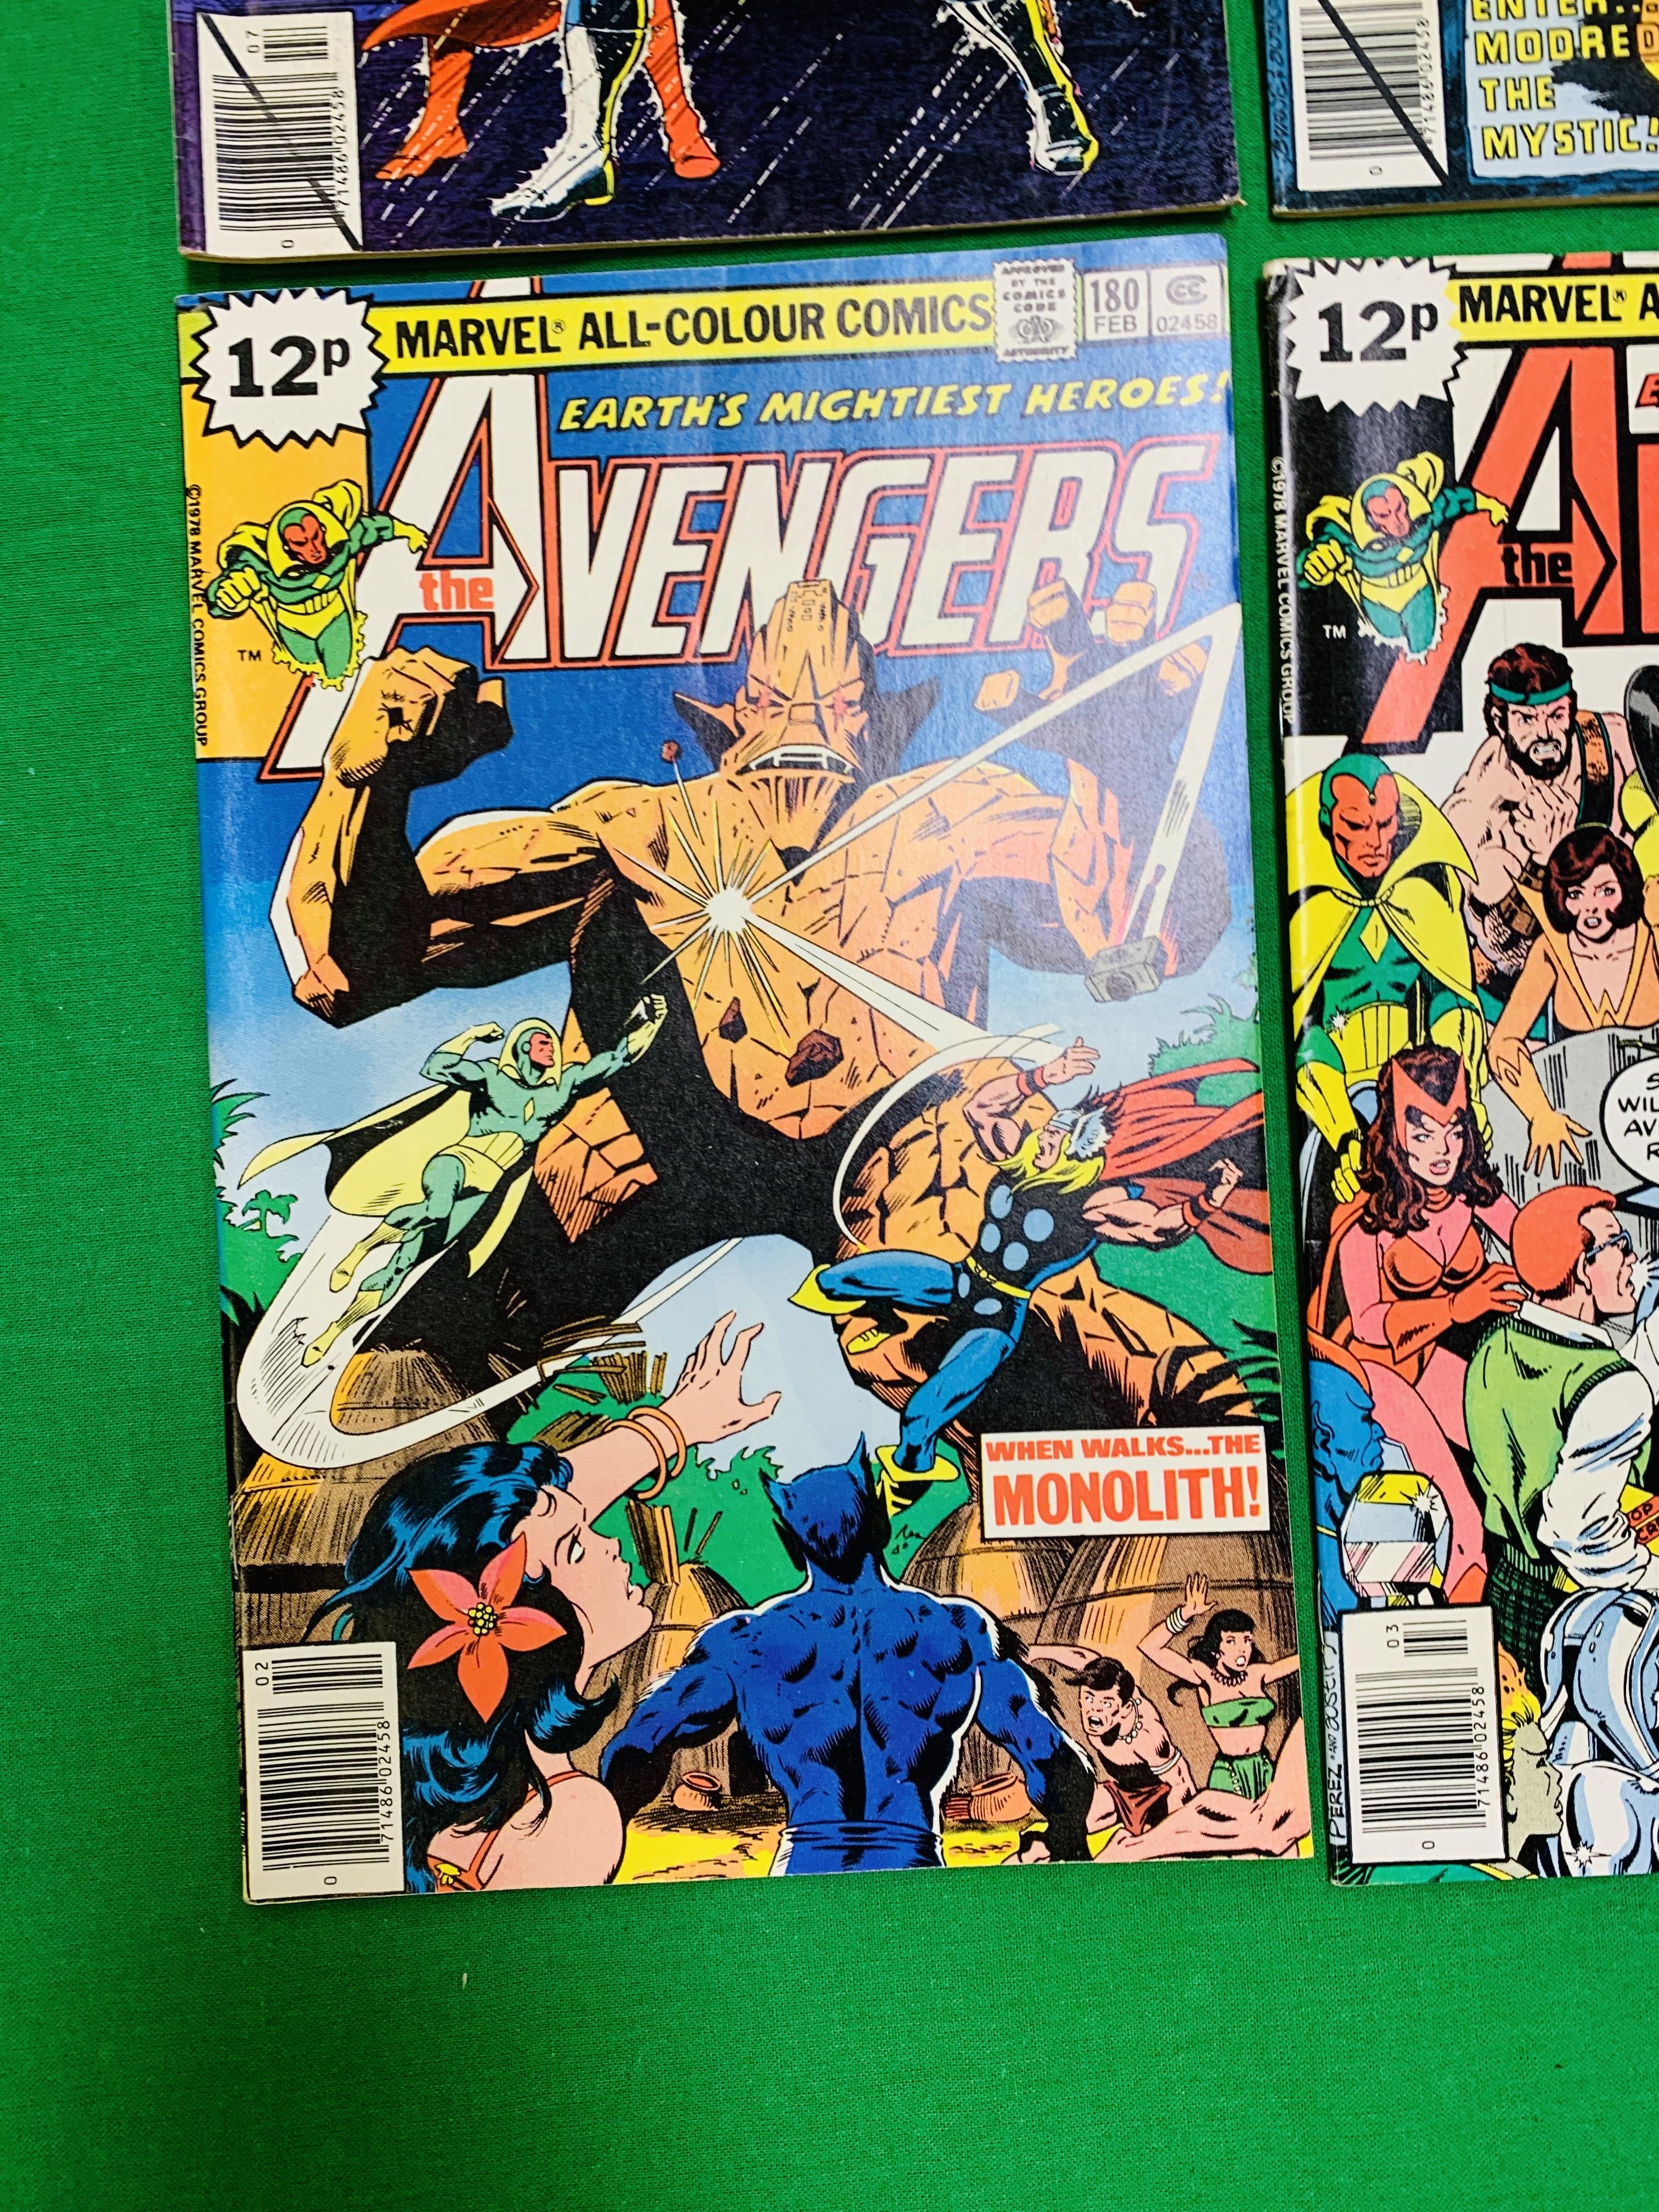 MARVEL COMICS THE AVENGERS NO. 101 - 299, MISSING ISSUES 103 AND 110. - Image 57 of 130